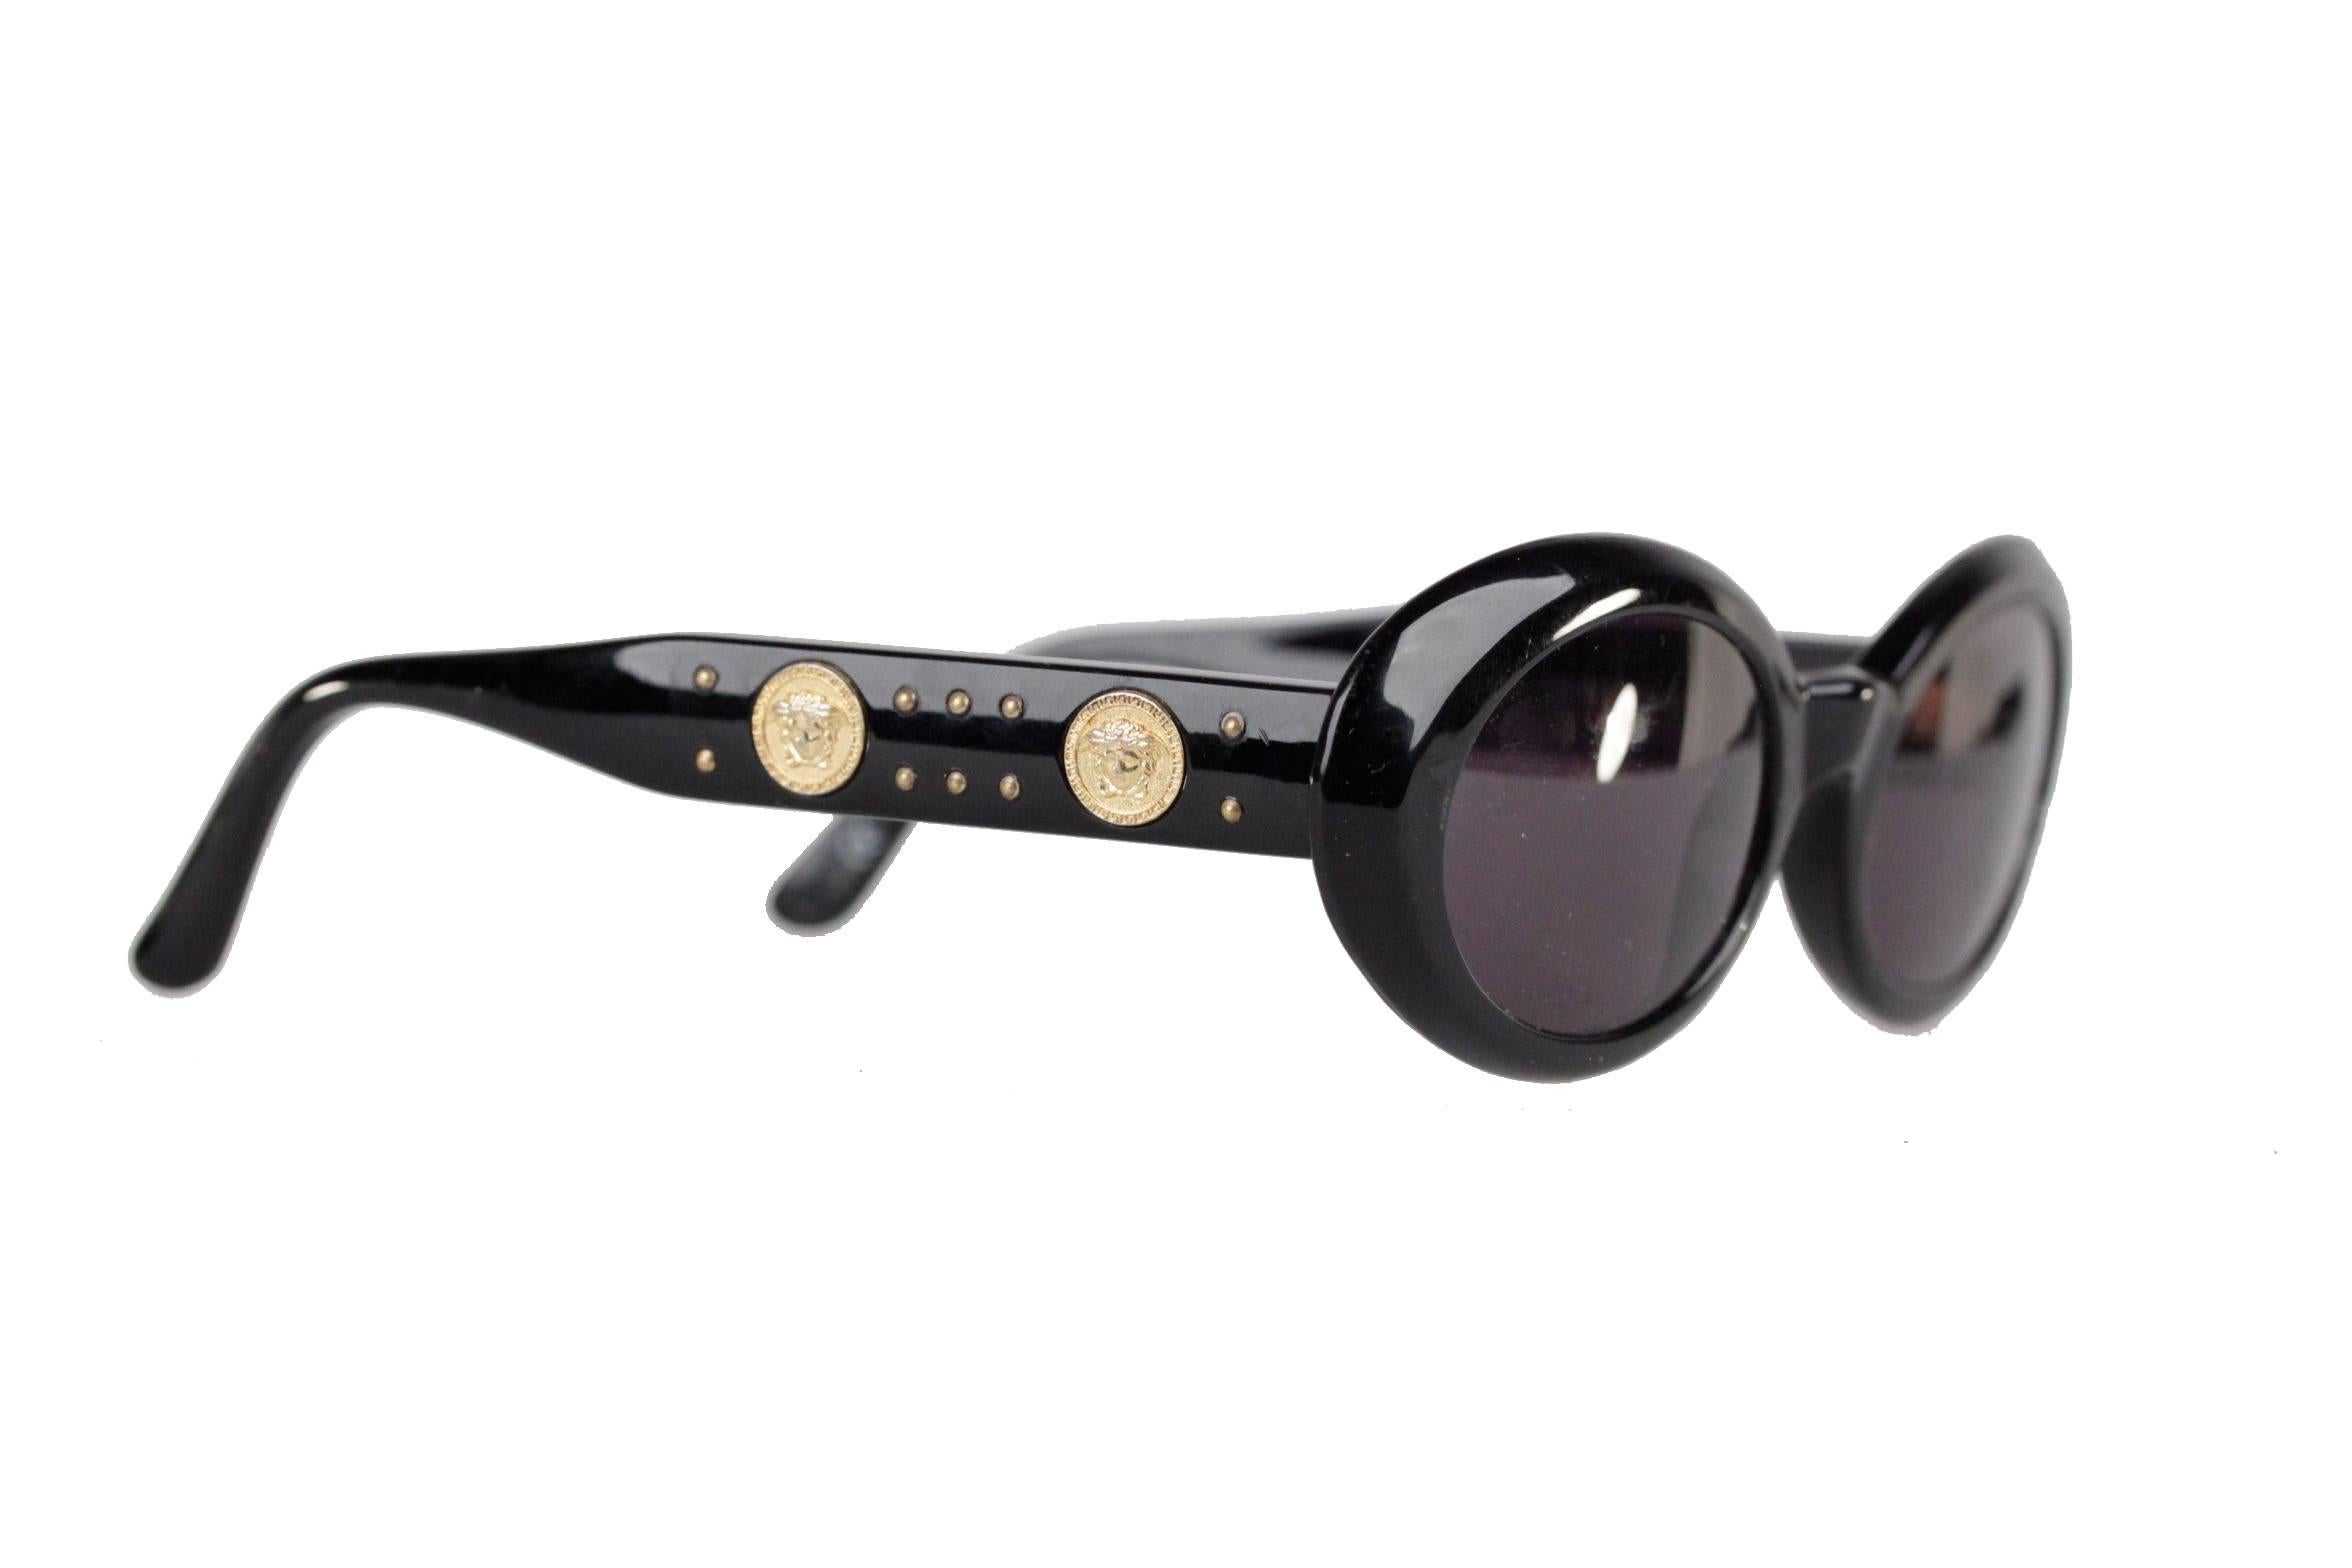  -Vintage Versace Mod 527/B sunglasses in black color

- Black frame

- Gold metal MEDUSA heads detailing with studs on both ear stems

- Period / Era: 1990s

- Logos / Tags: The inner left temple bares the model number and color code while